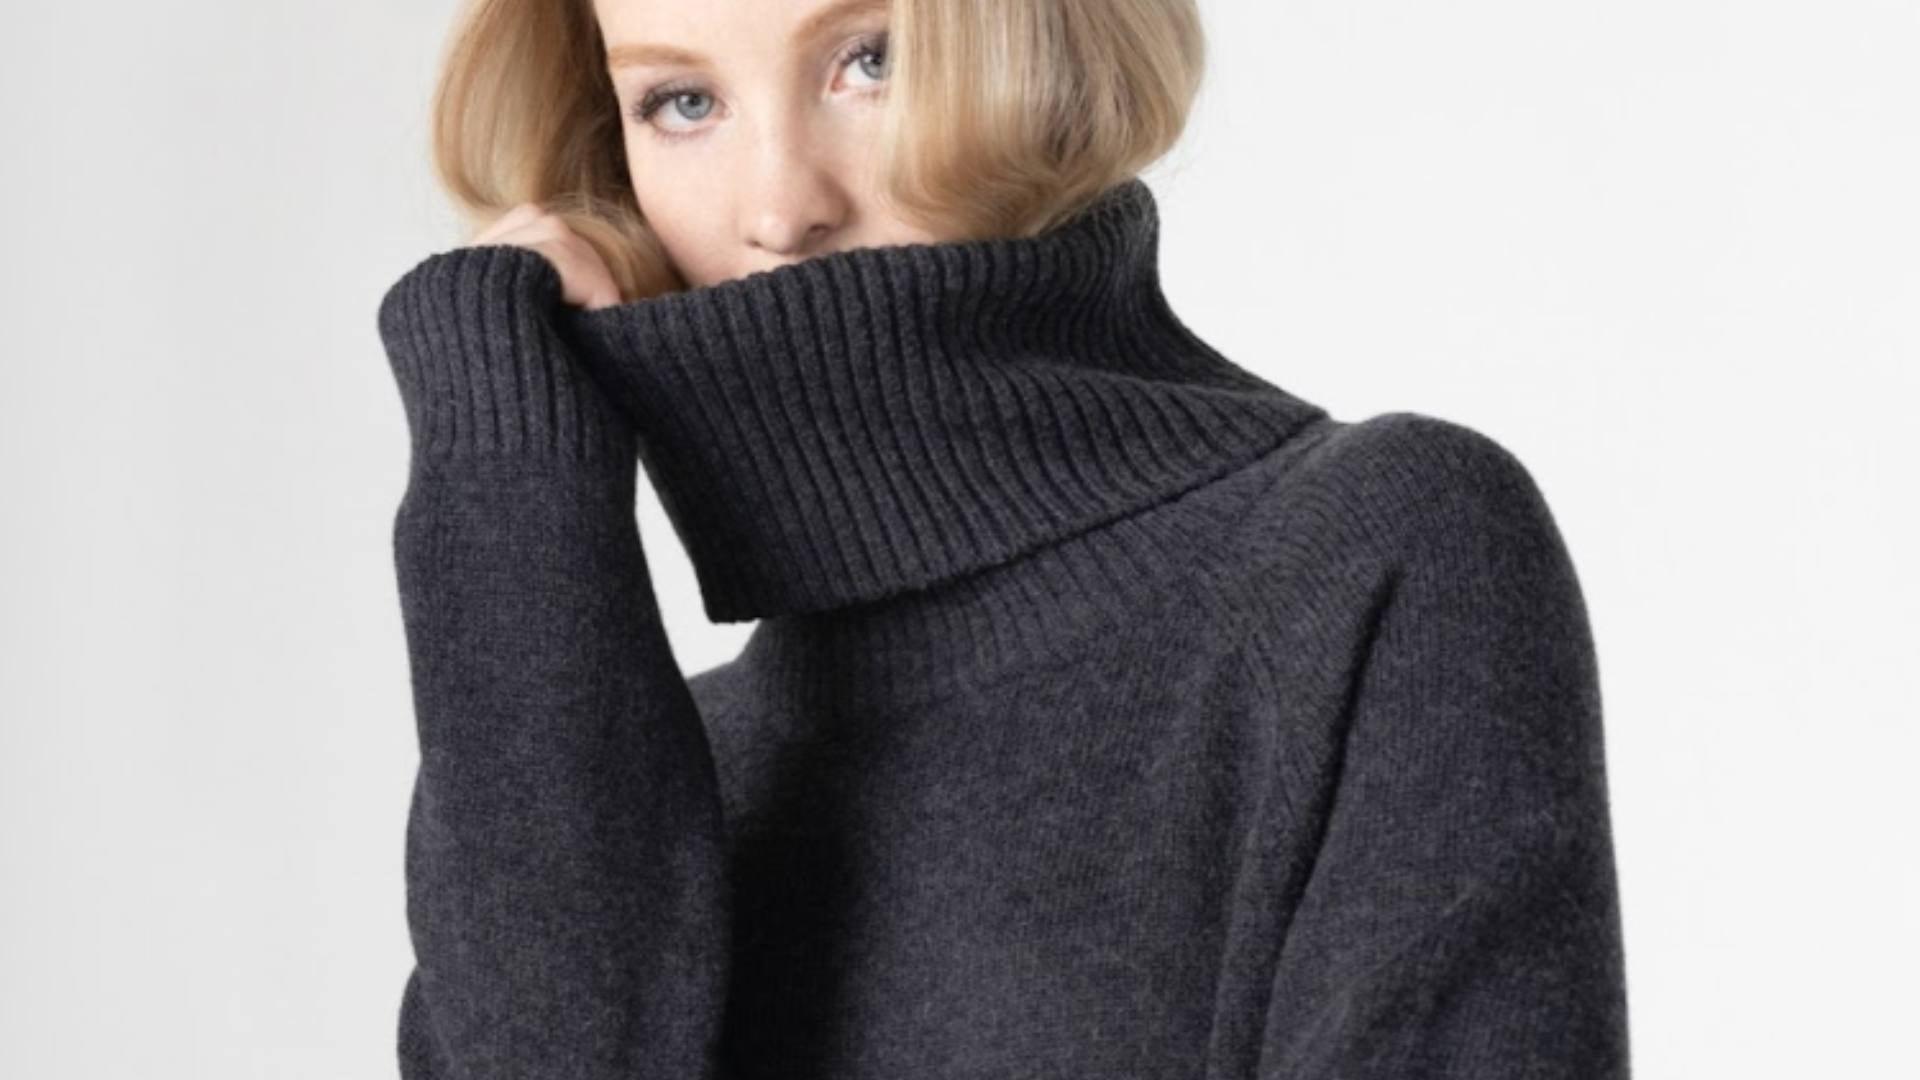 A blonde woman wears a dark gray turtleneck and poses for the camera, demonstrating cozy loungewear.